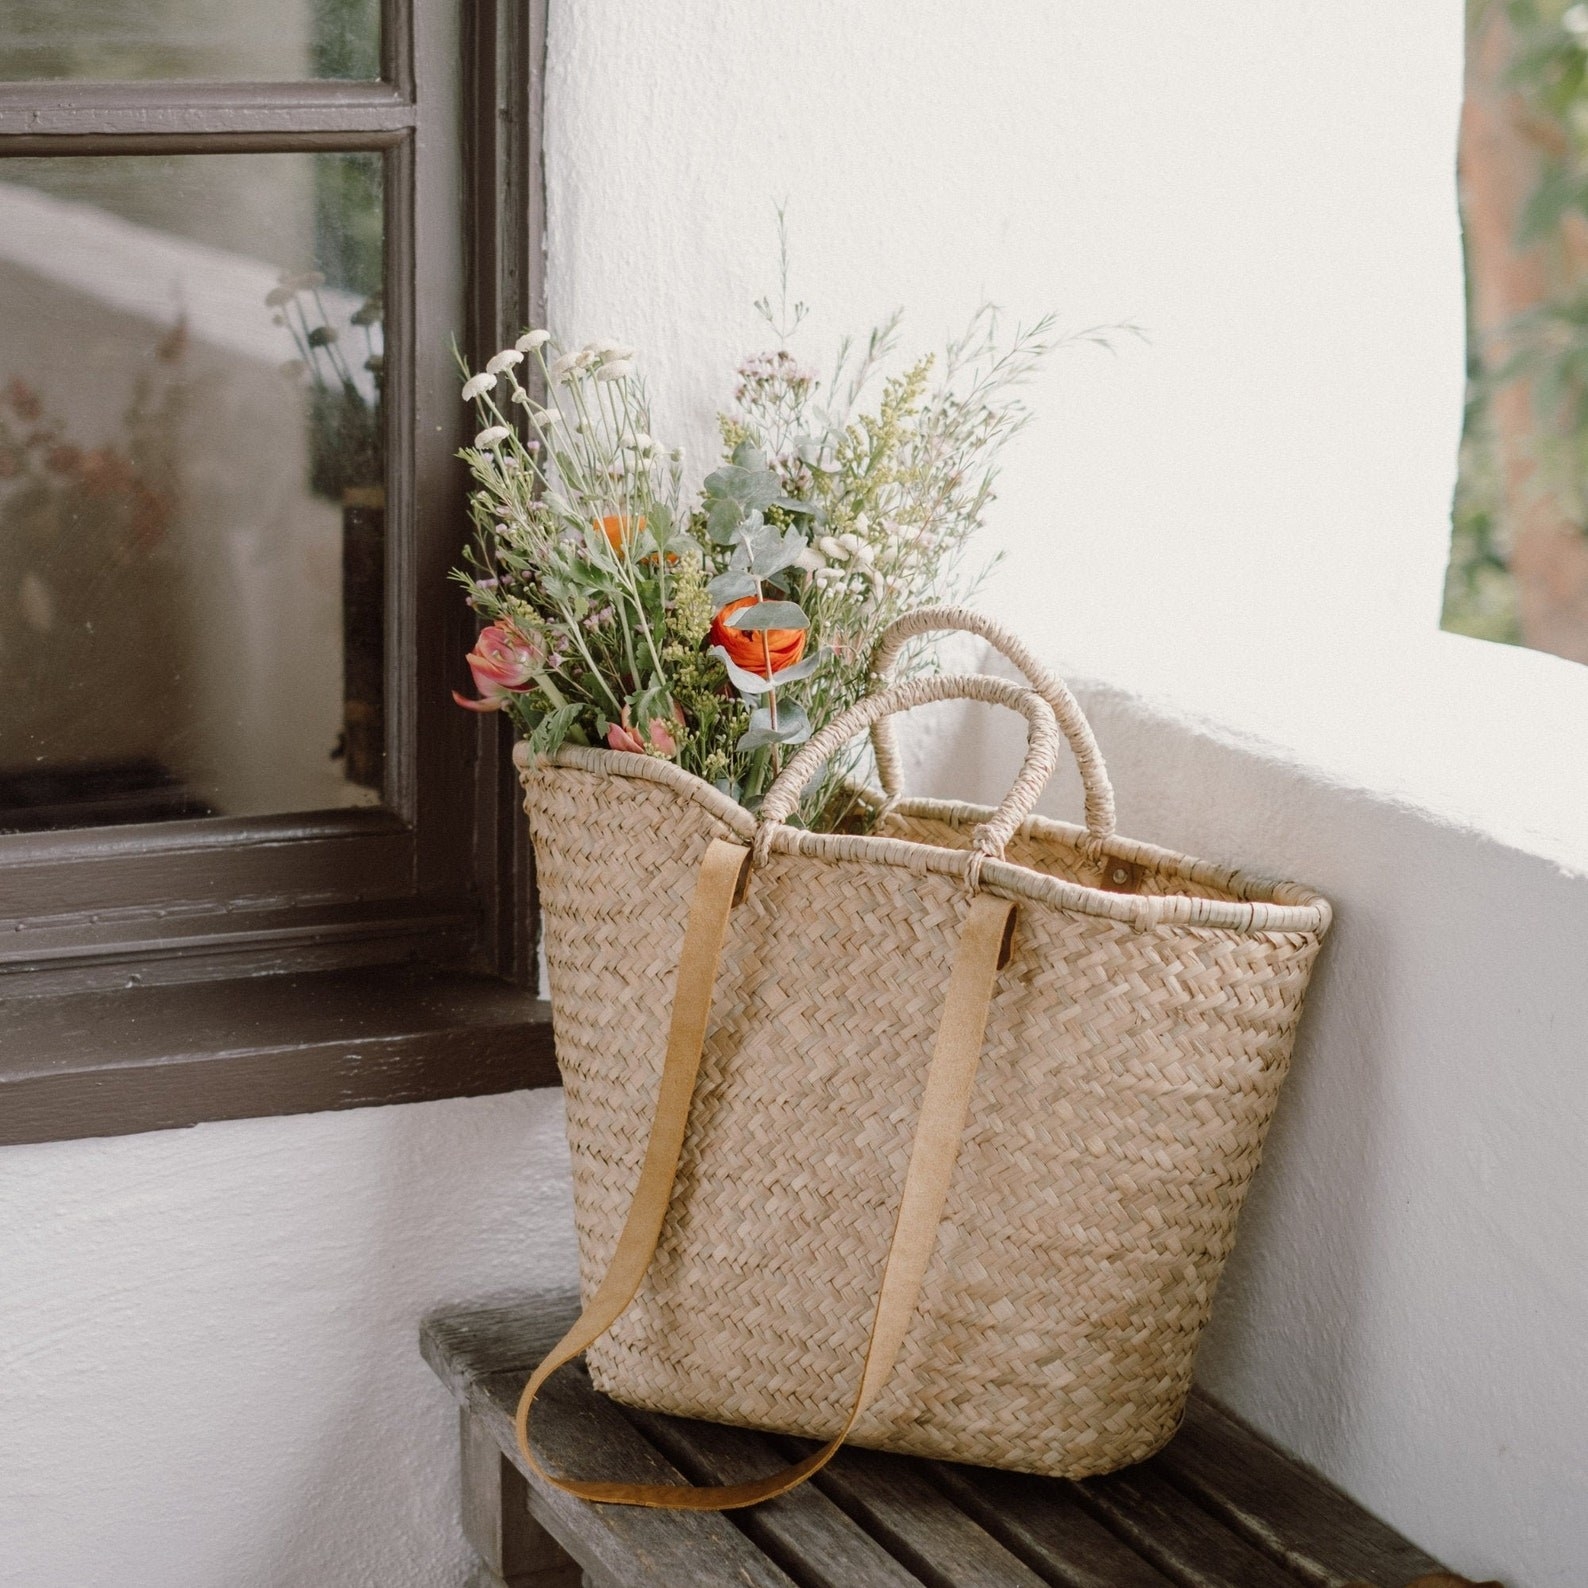 woven market style bag with a bouquet of flowers in it